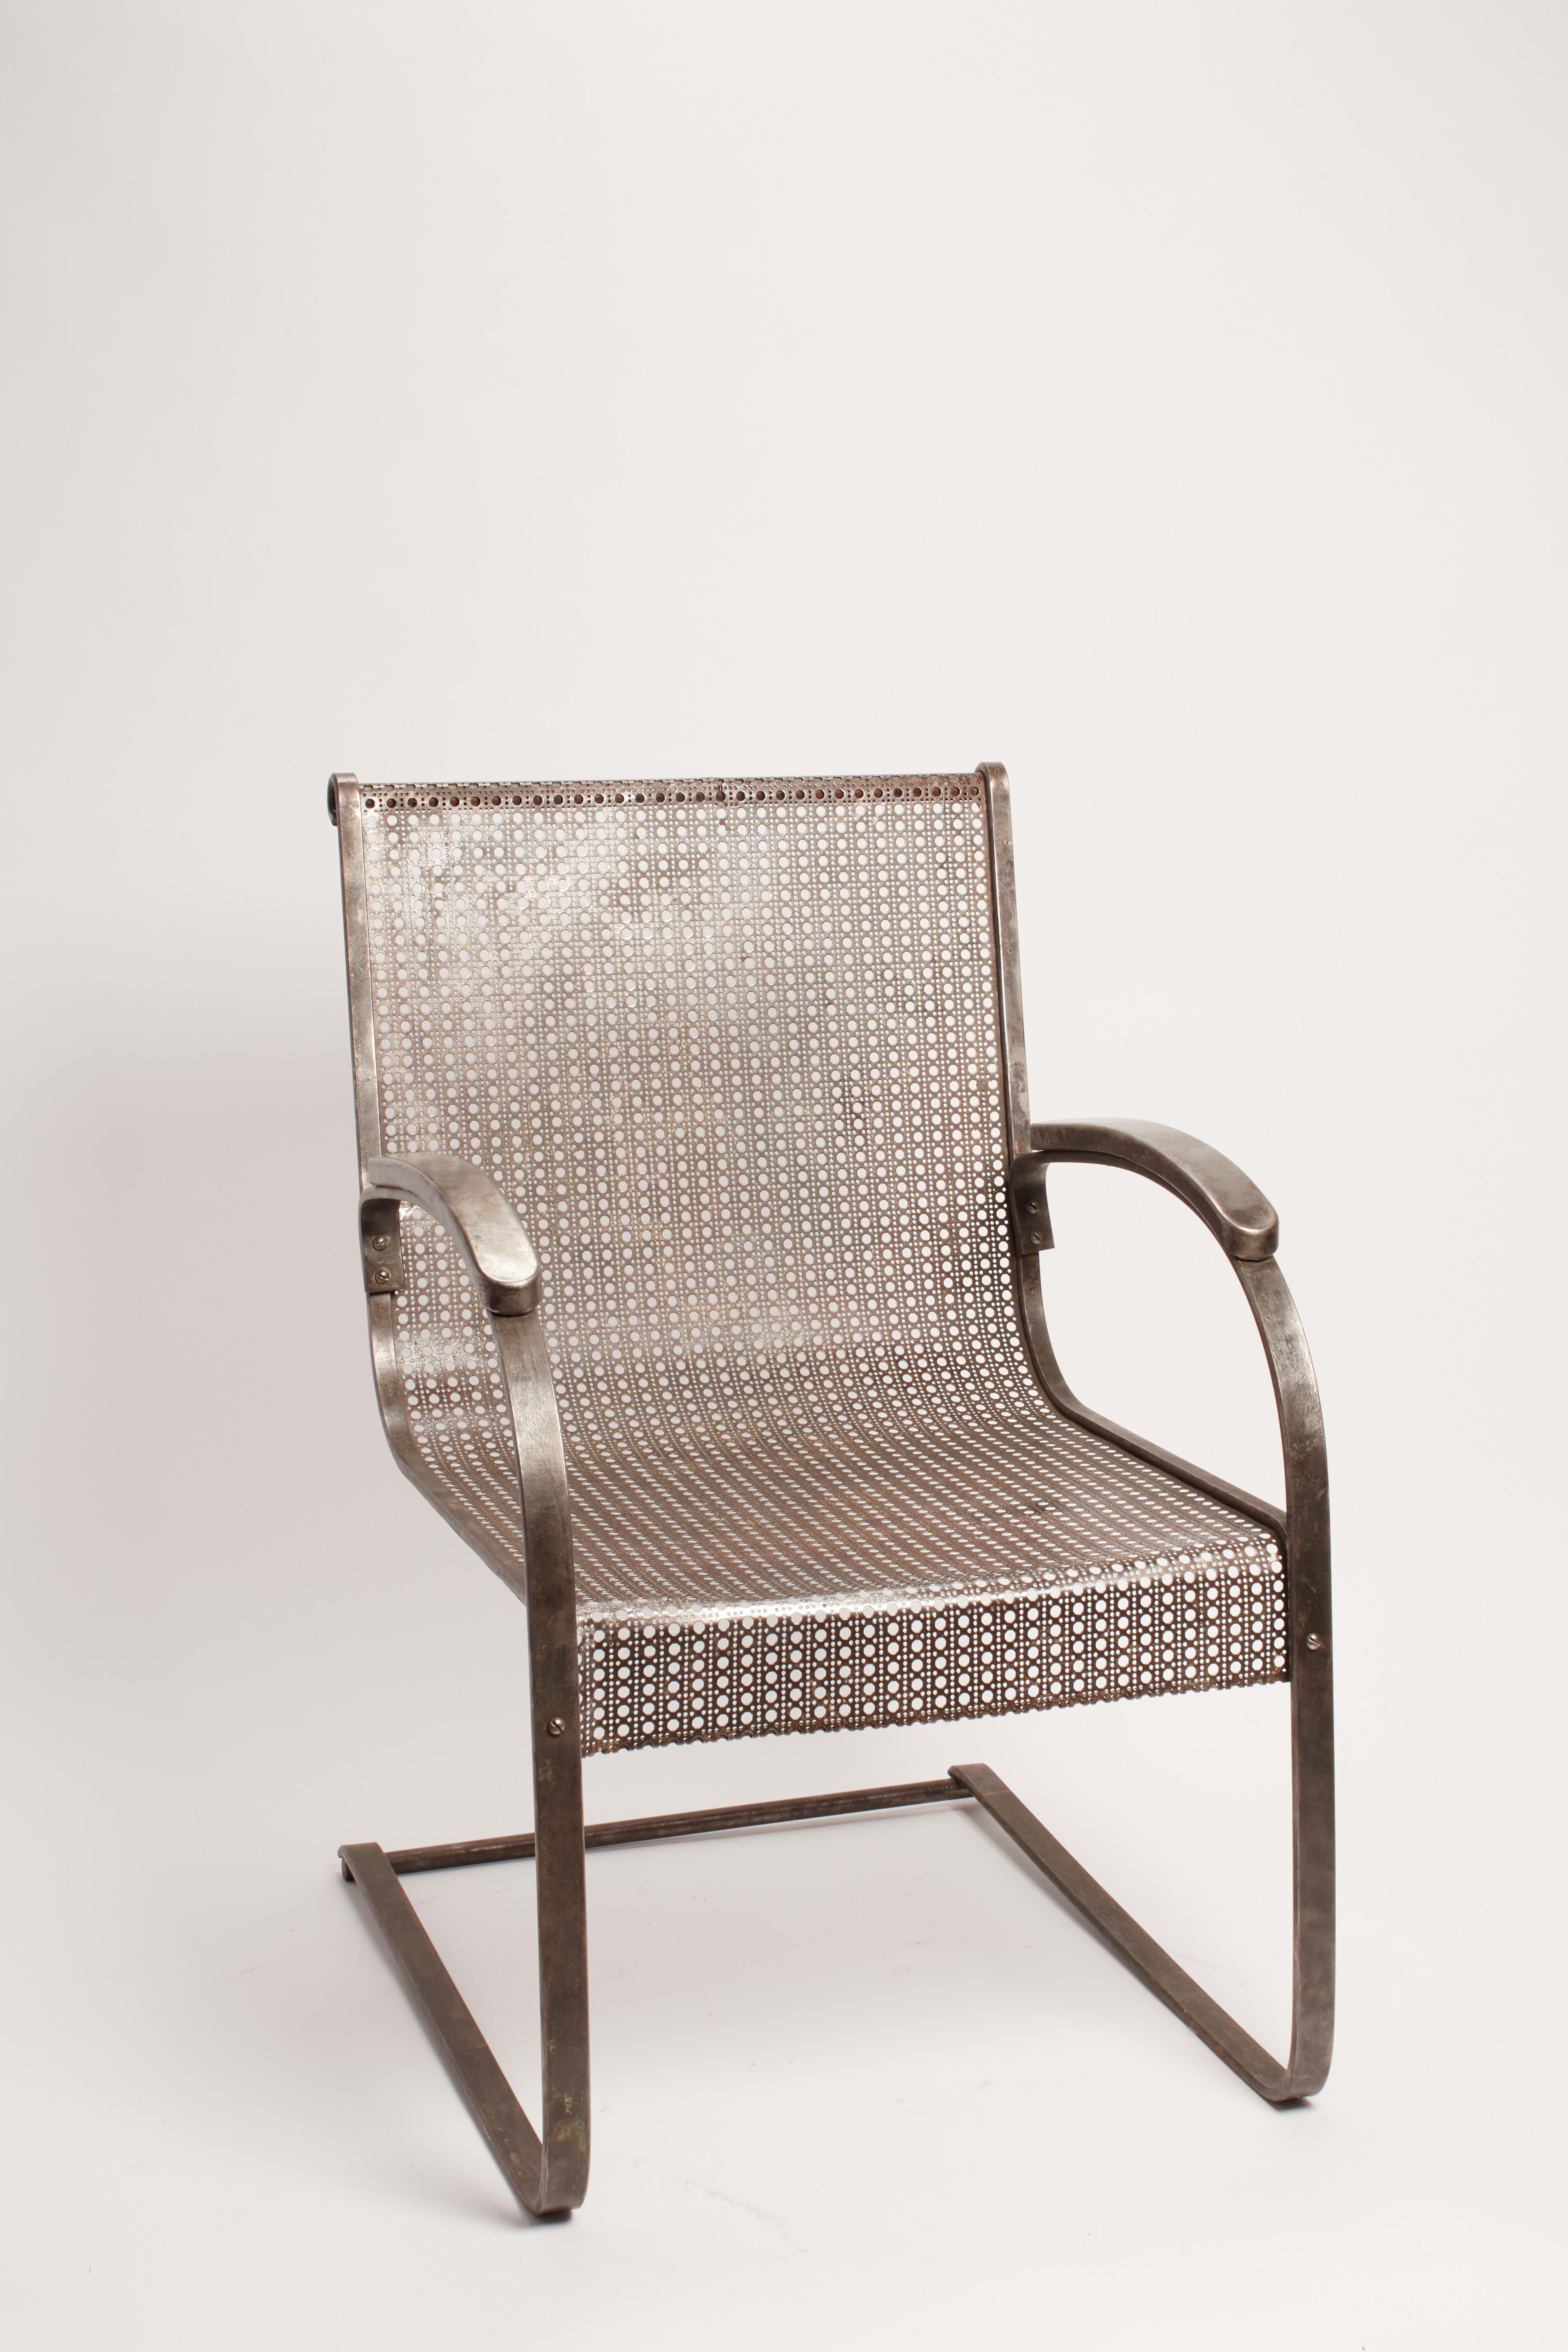 Pair of iron armchairs with perforated sheet used as support for back and seat. Equipped with armrests. USA 1930 ca.